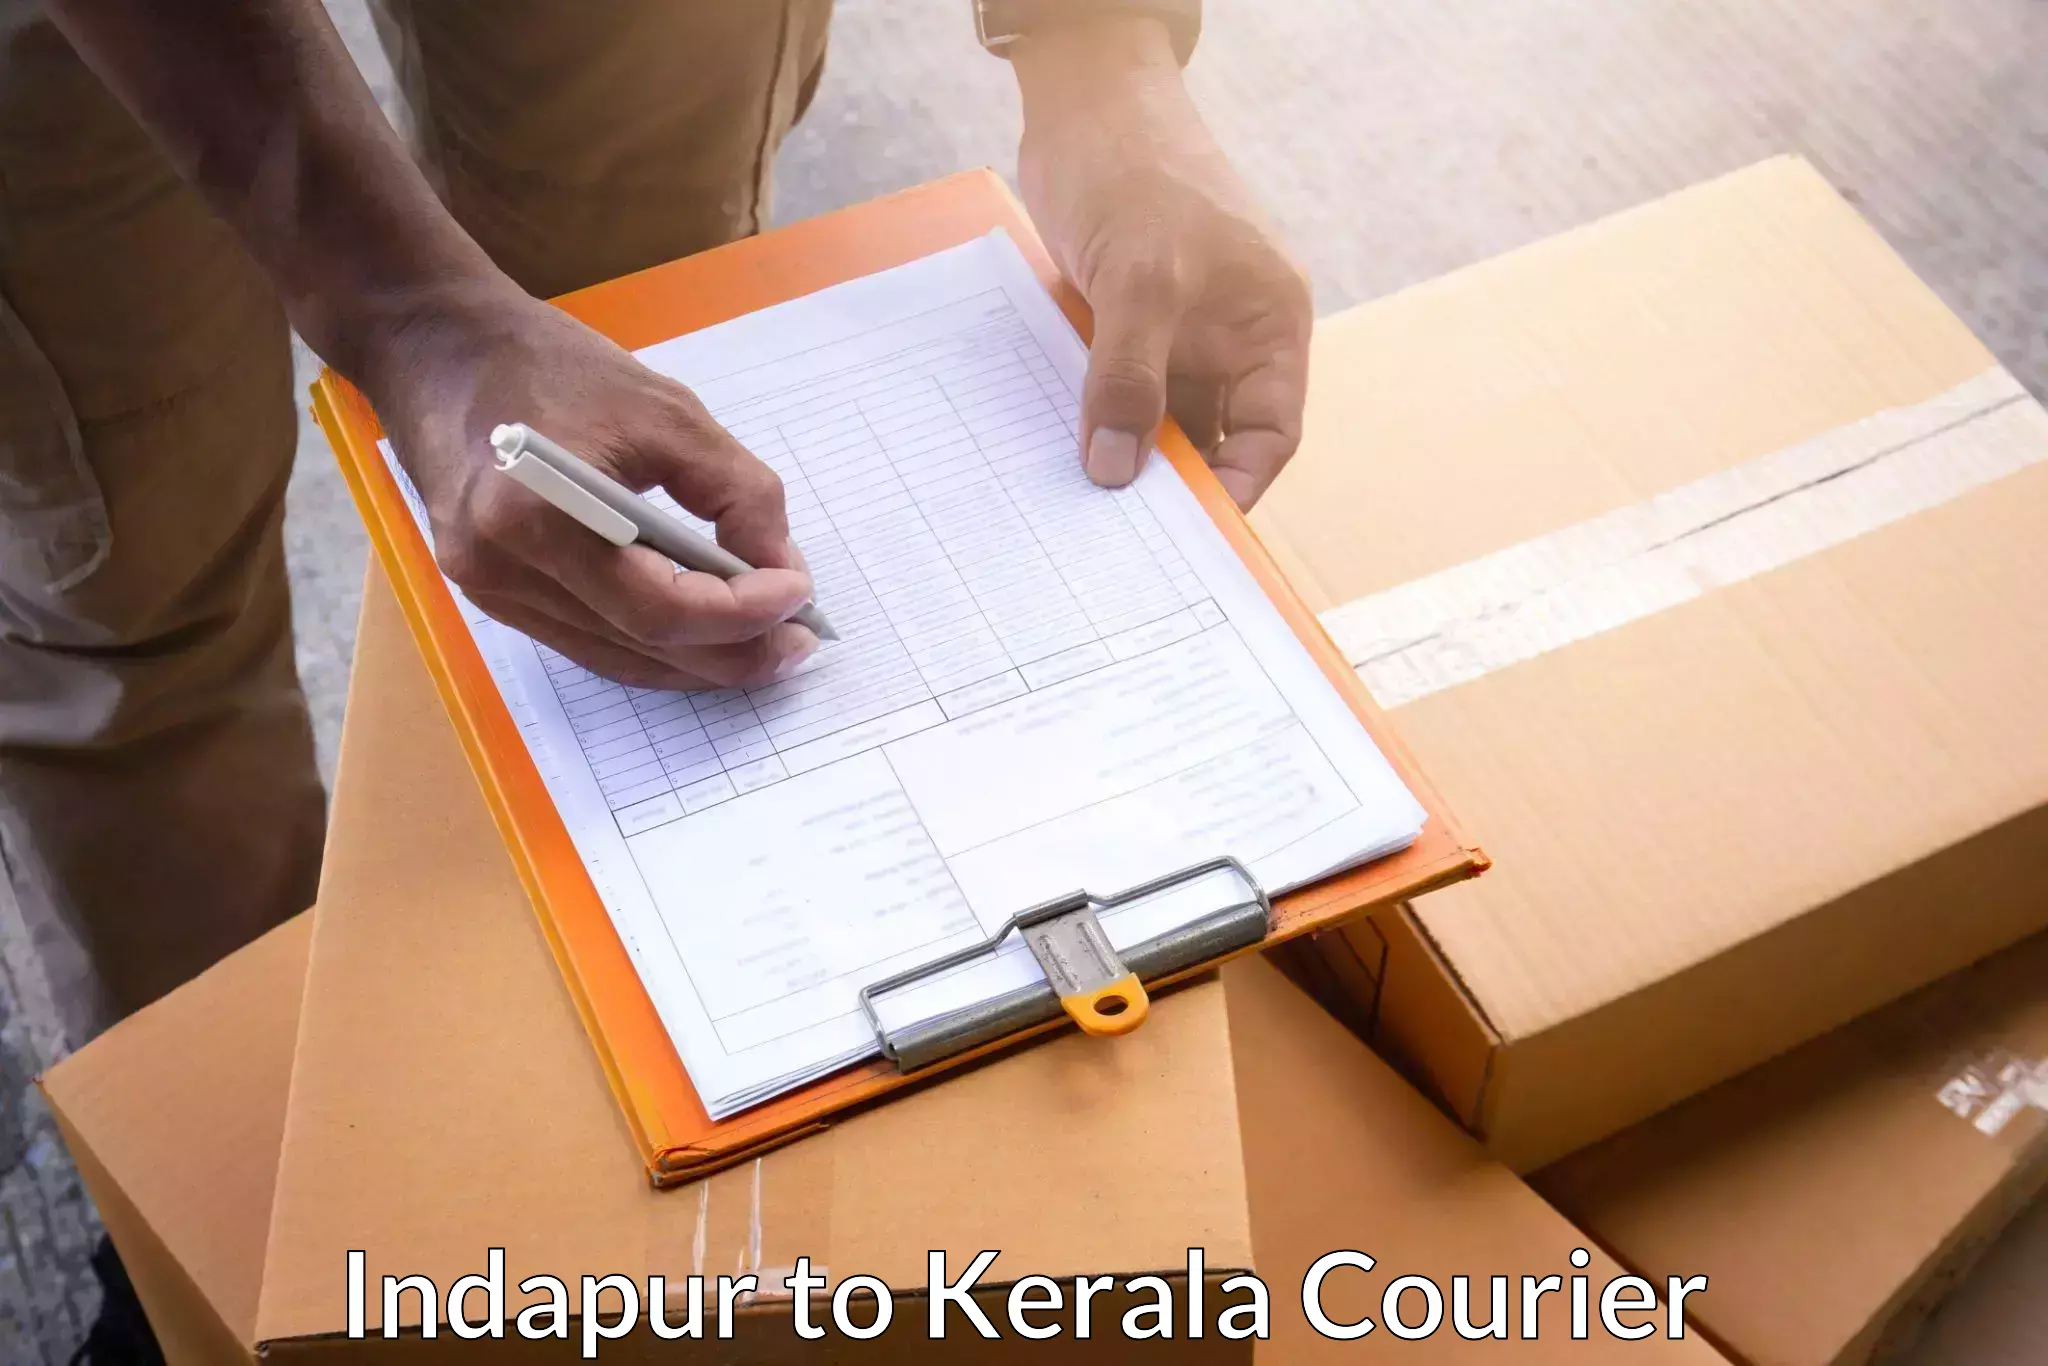 Express package delivery in Indapur to Kerala